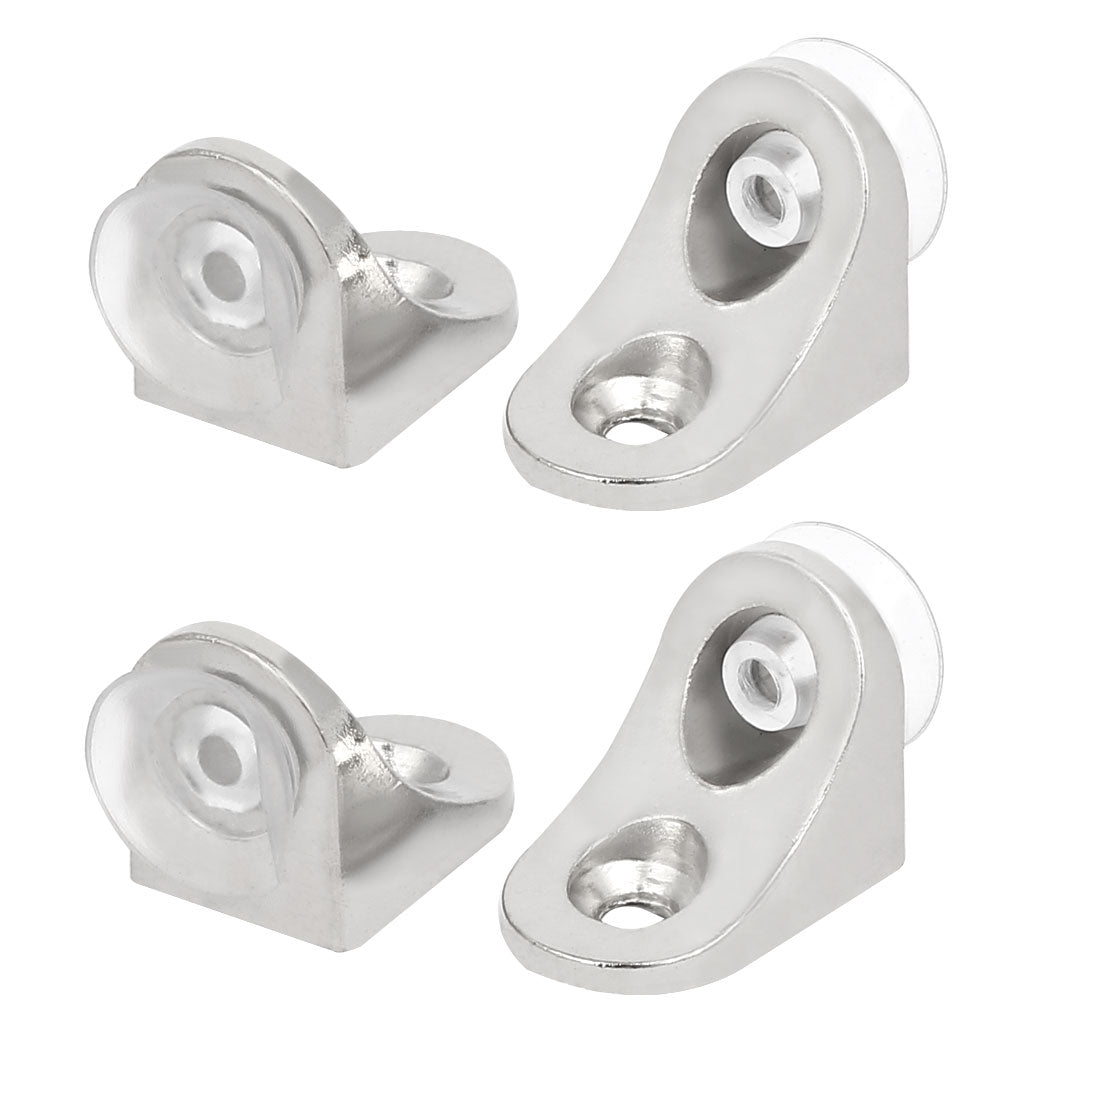 uxcell Uxcell Stainless Steel 90 Degree Angle Glass Shelf Support Fixing Clip Bracket 4pcs